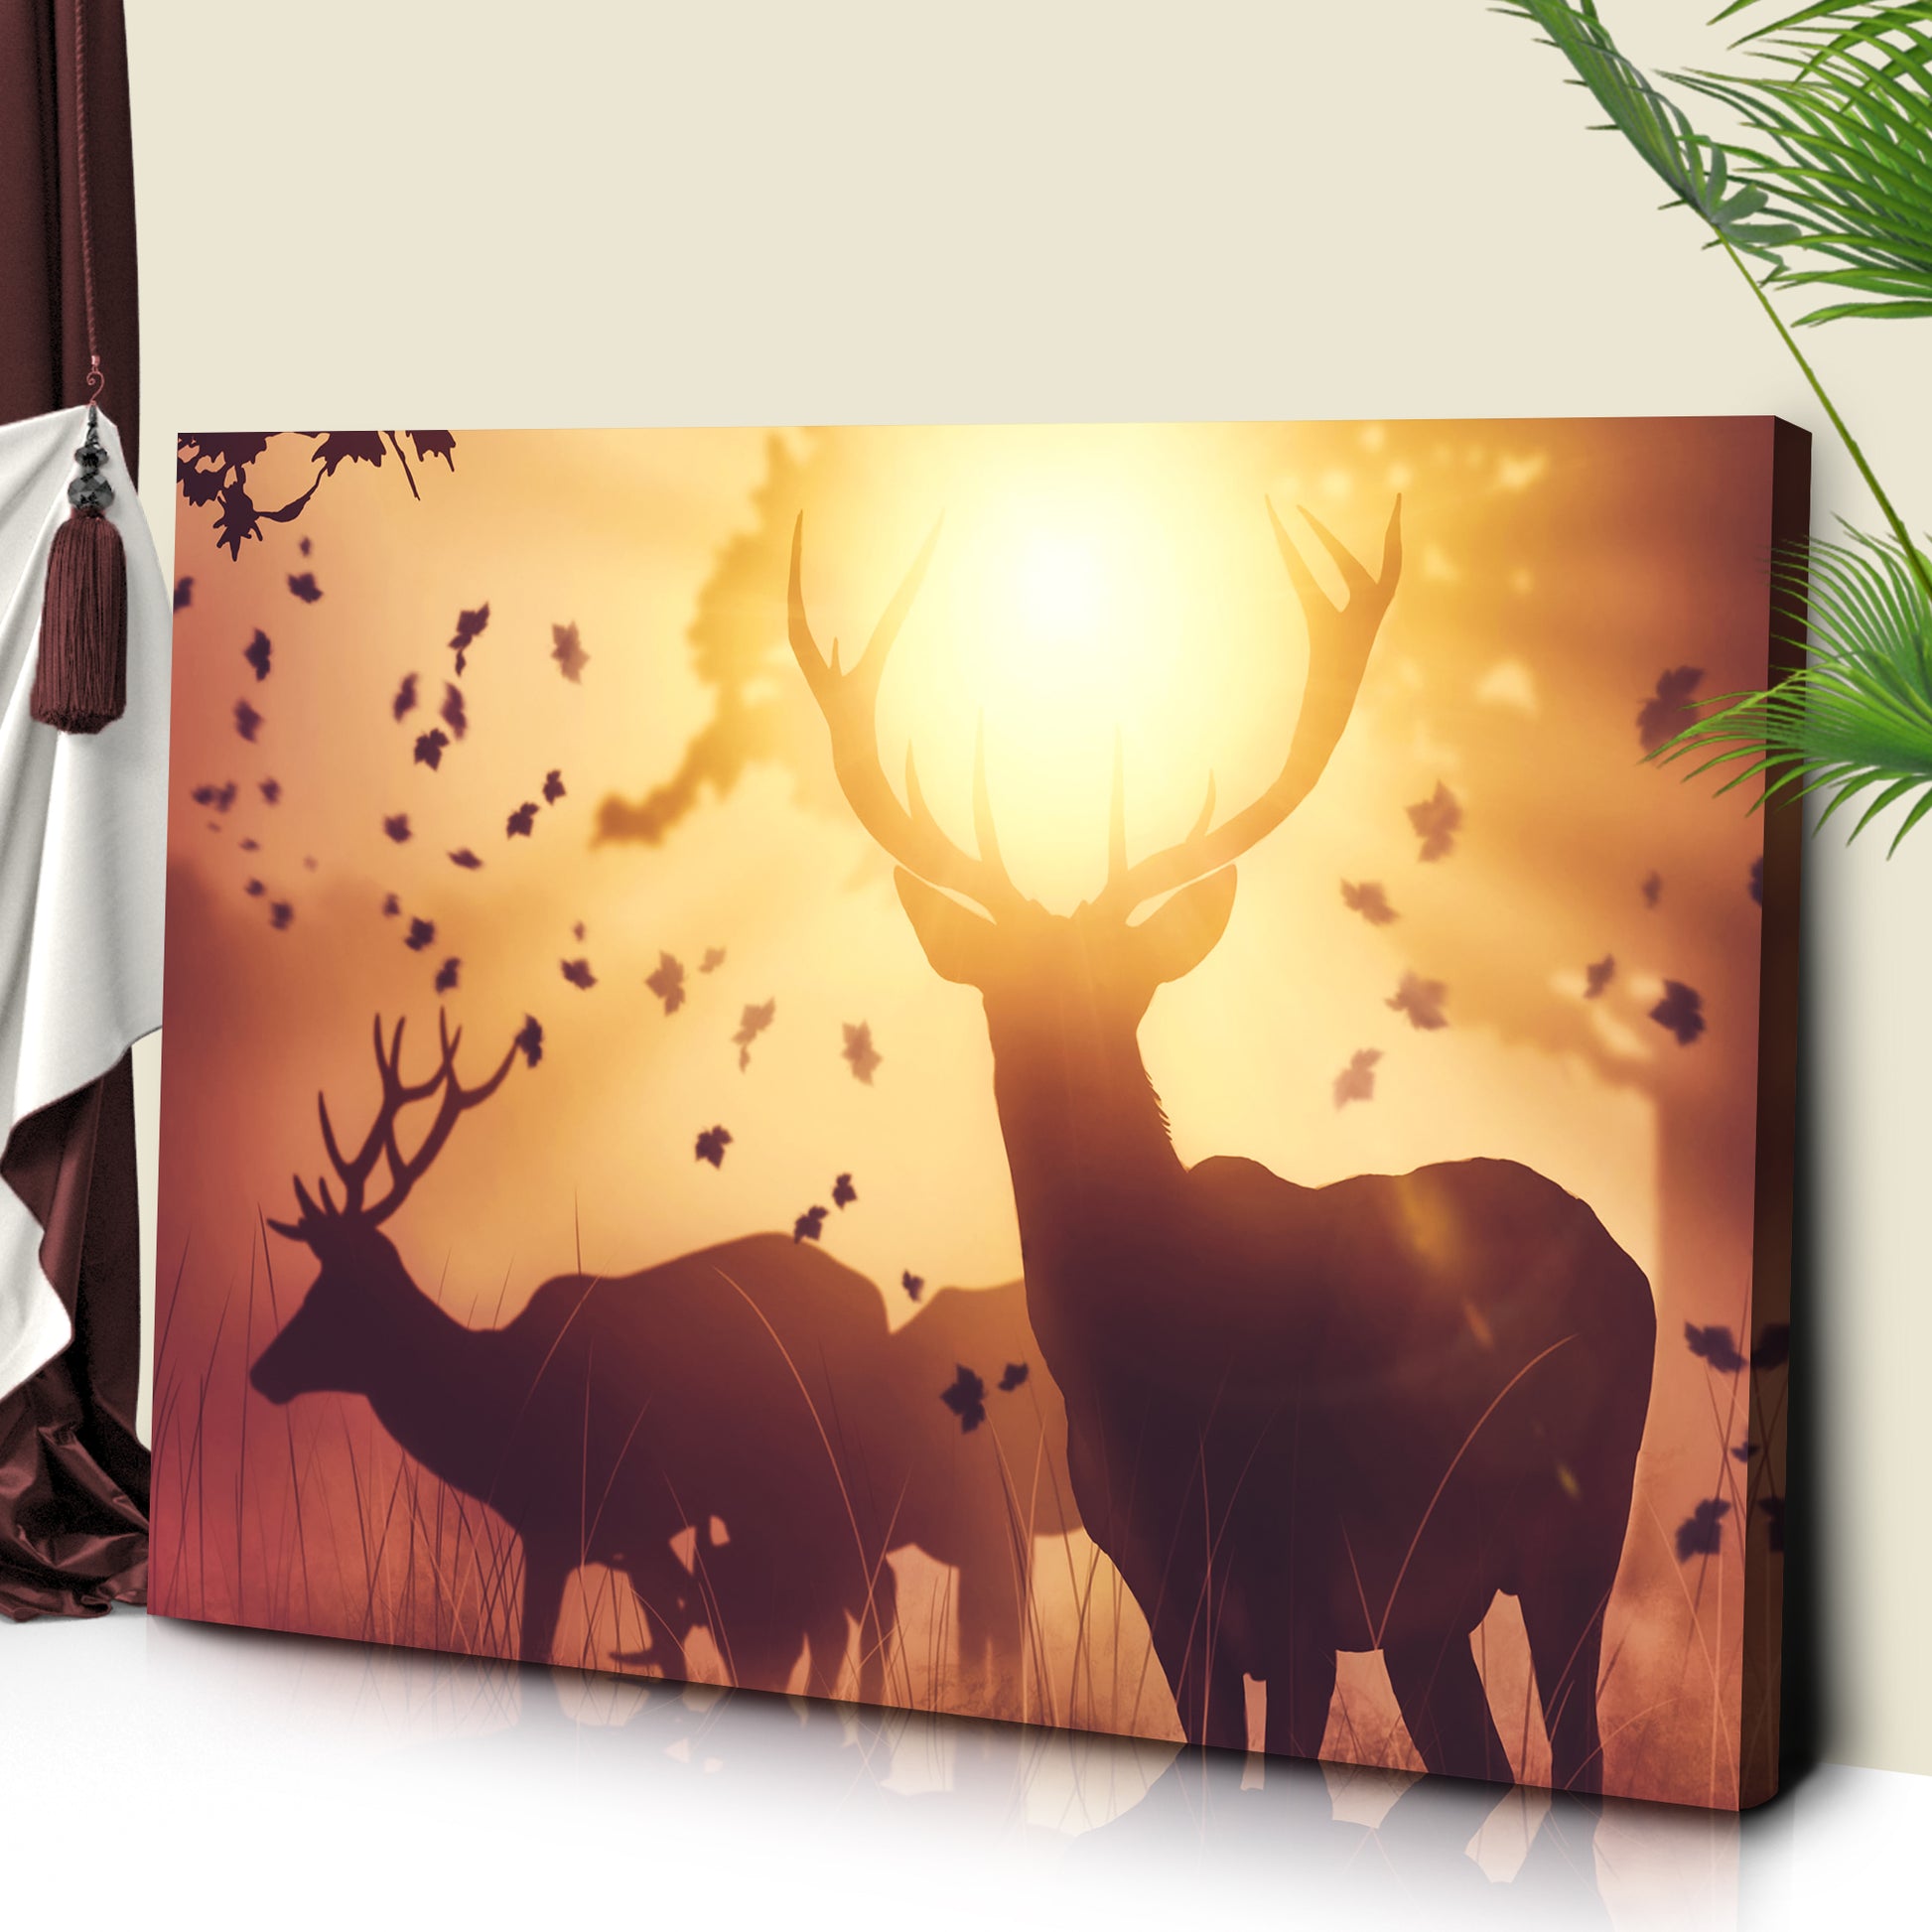 Deer At Sunset Canvas Wall Art Style 1 - Image by Tailored Canvases